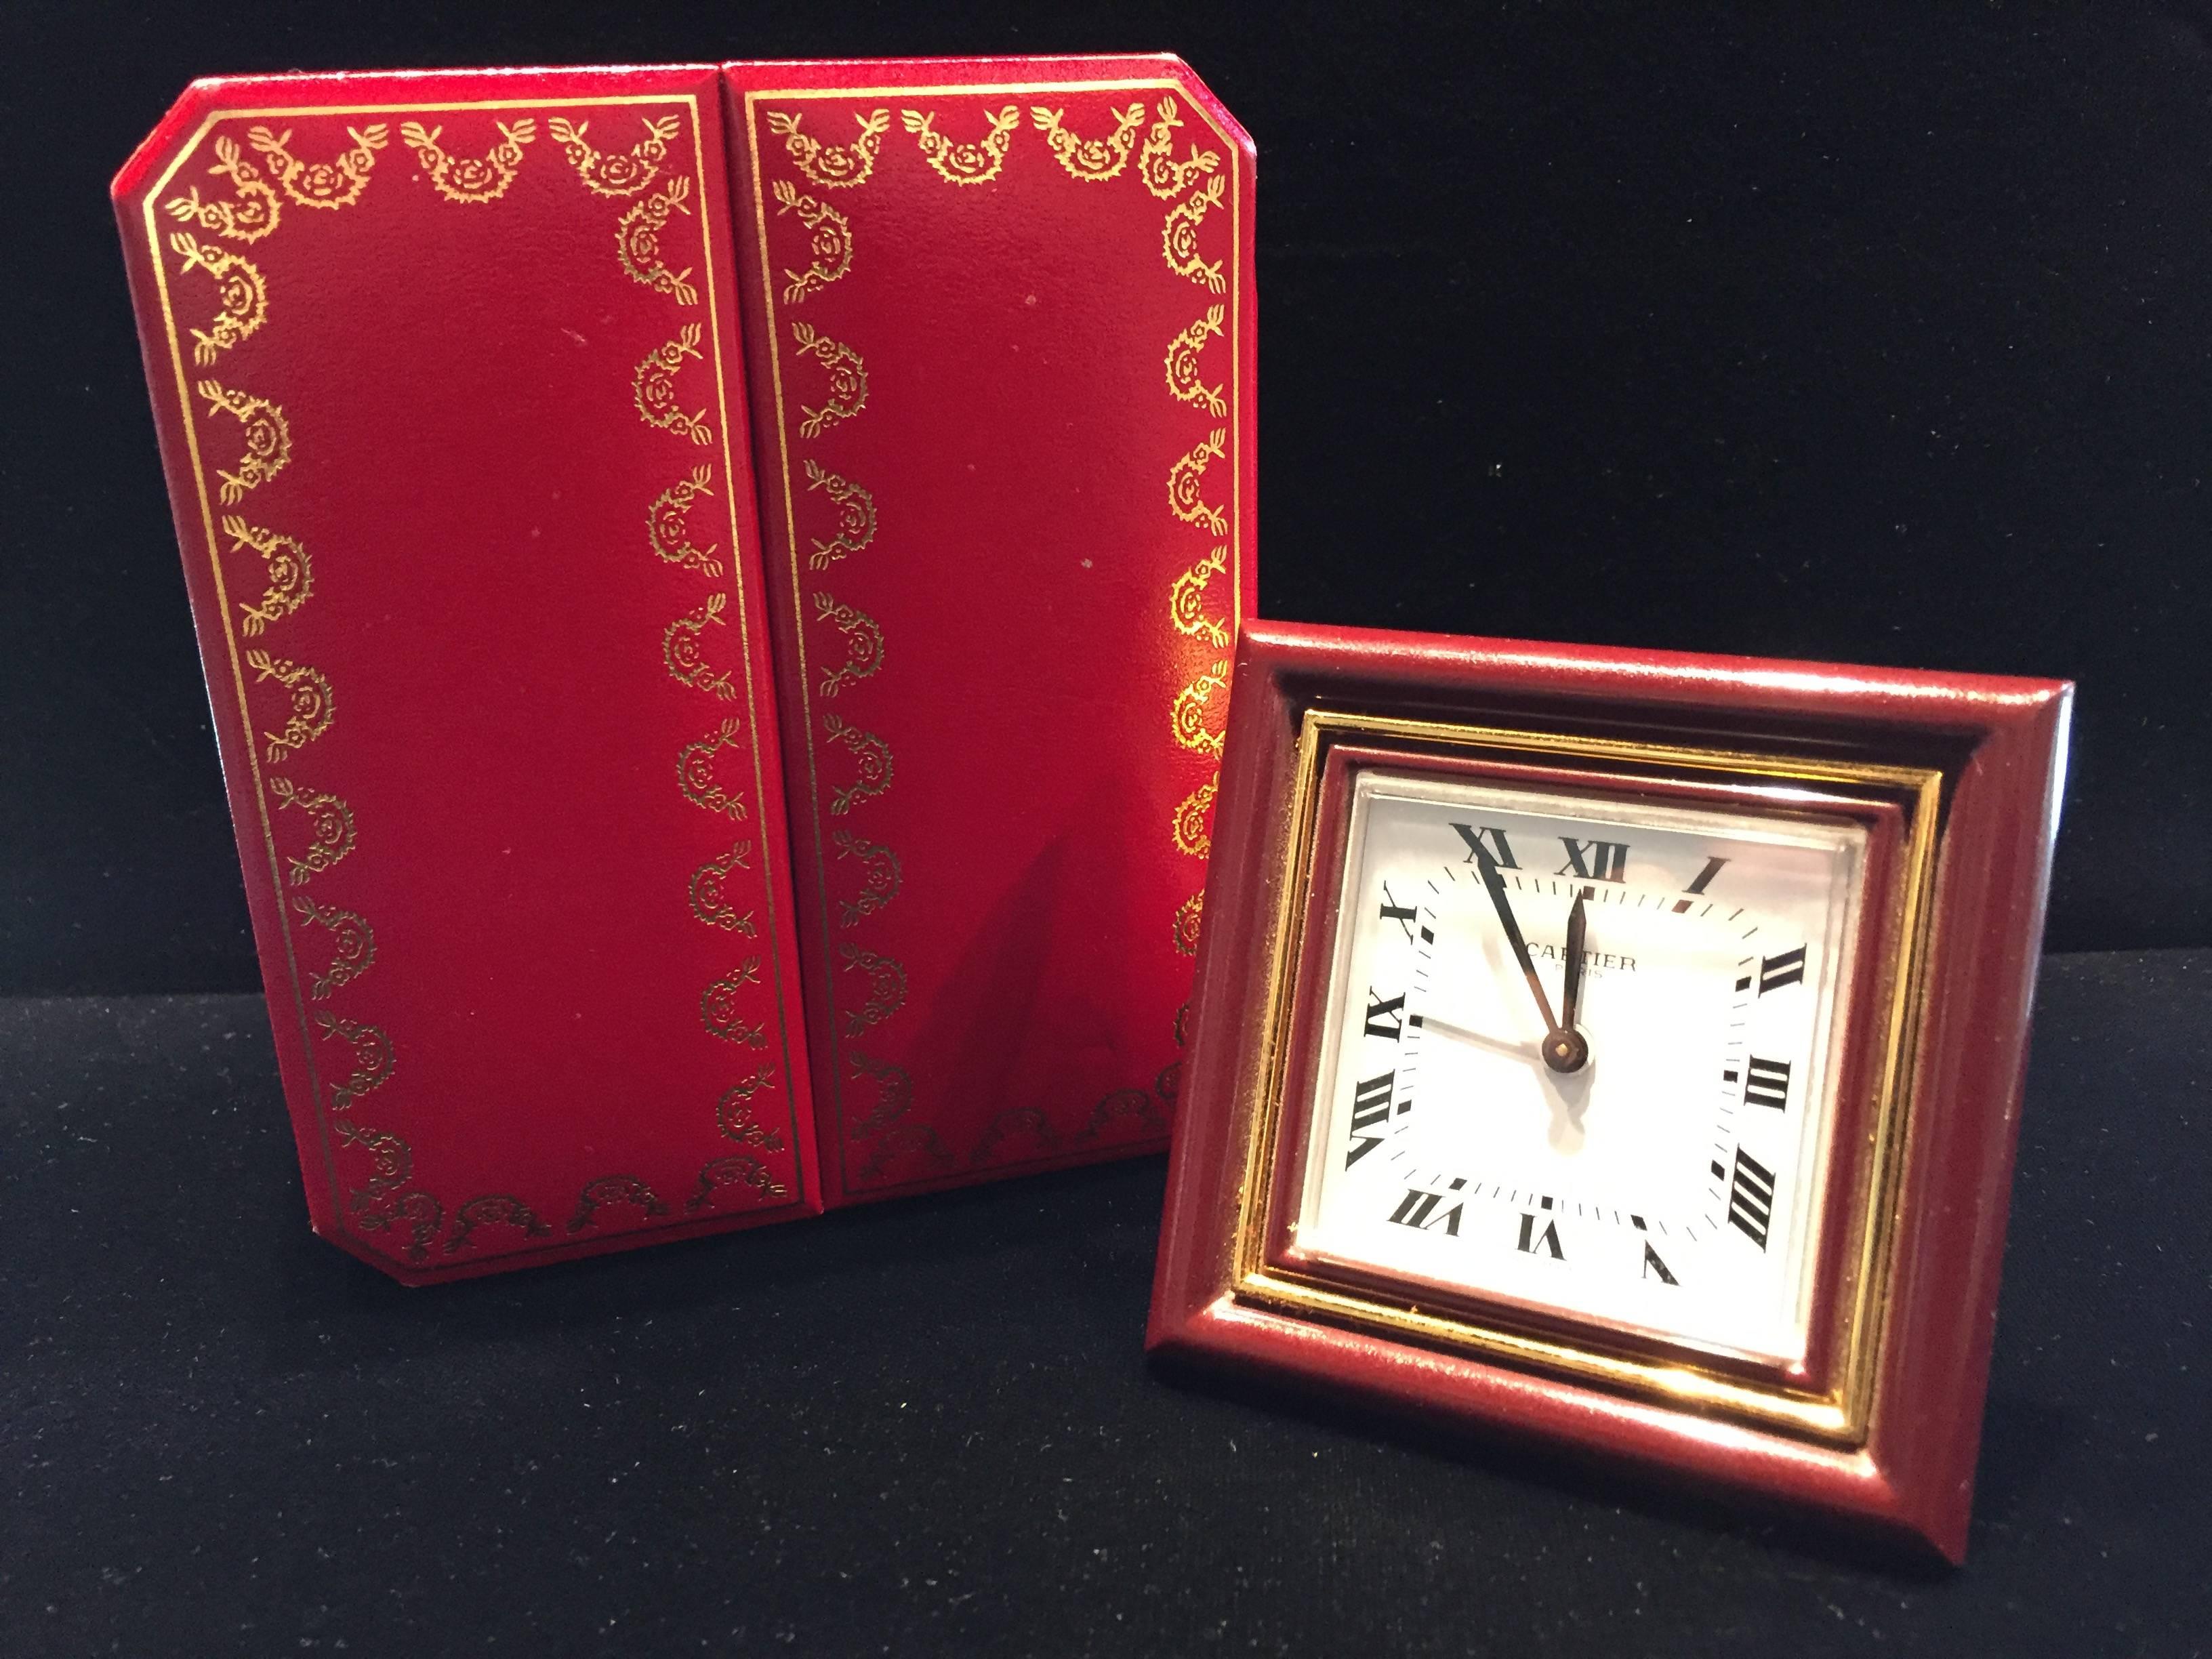 Le Must de Cartier burgundy red travel alarm clock, together with original Red gilt embossed travel box.

Travel size box exterior measurements 4.75